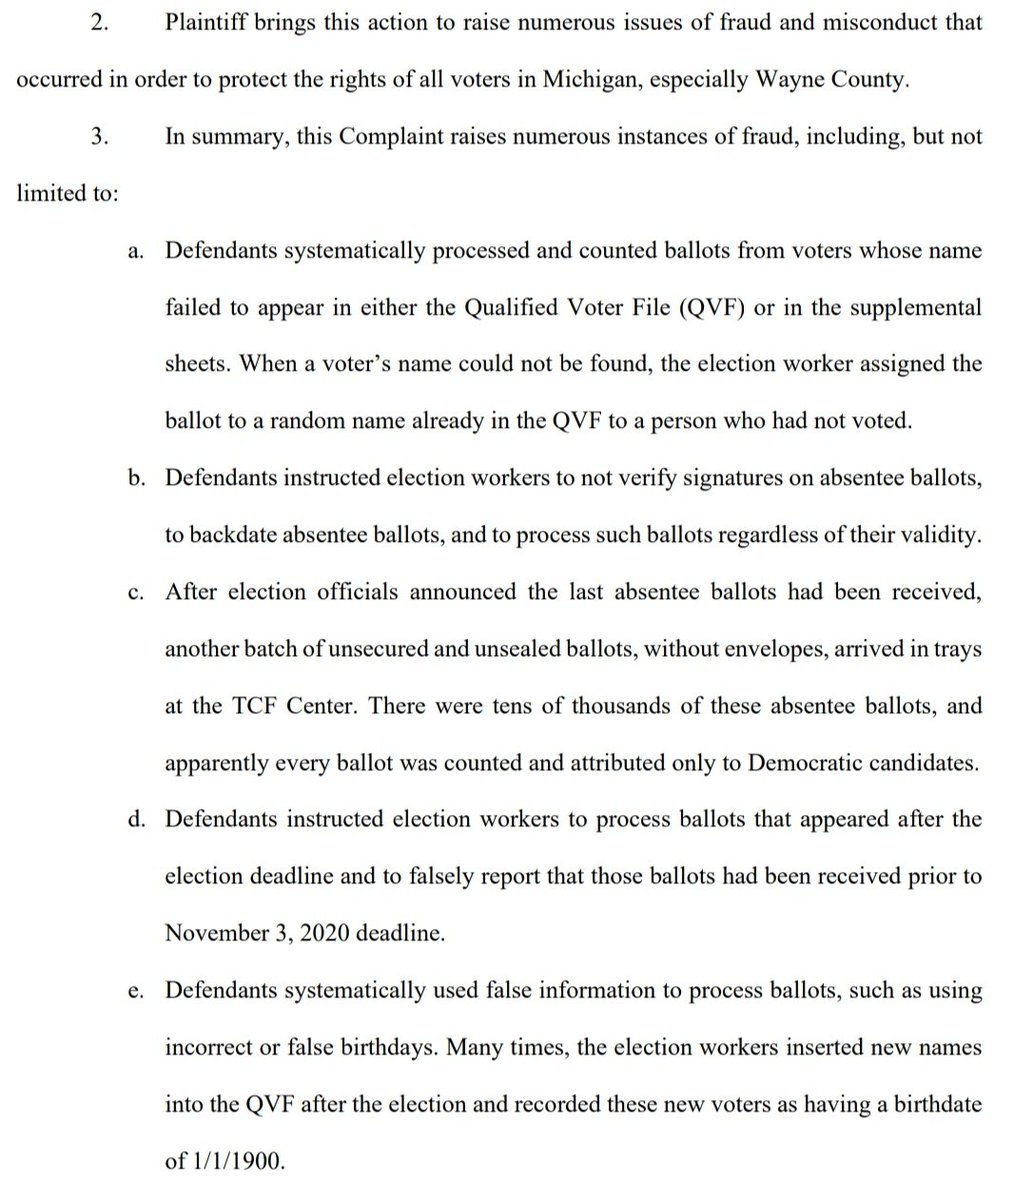 Here's the summary of the charges, which basically boils down to "ballots and voters were being added to the totals en masse under sketchy circumstances"Ok, bad if true. What else you got?2/